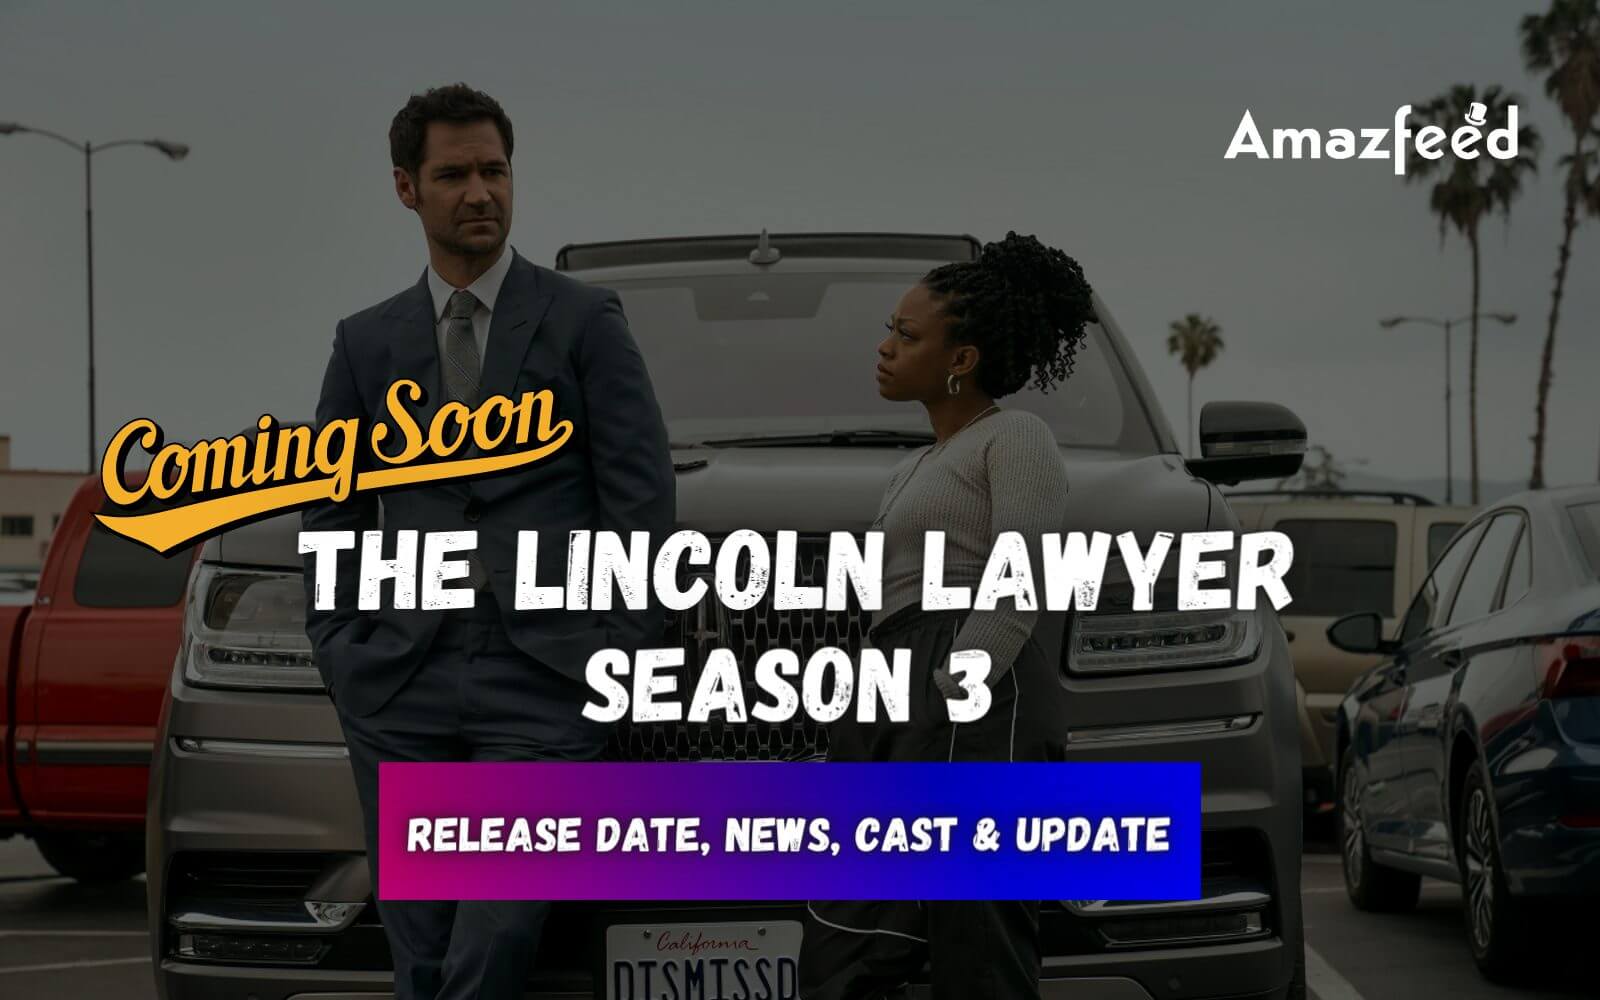 The Lincoln Lawyer Season 3 ⇒ Release Date News Cast Spoilers